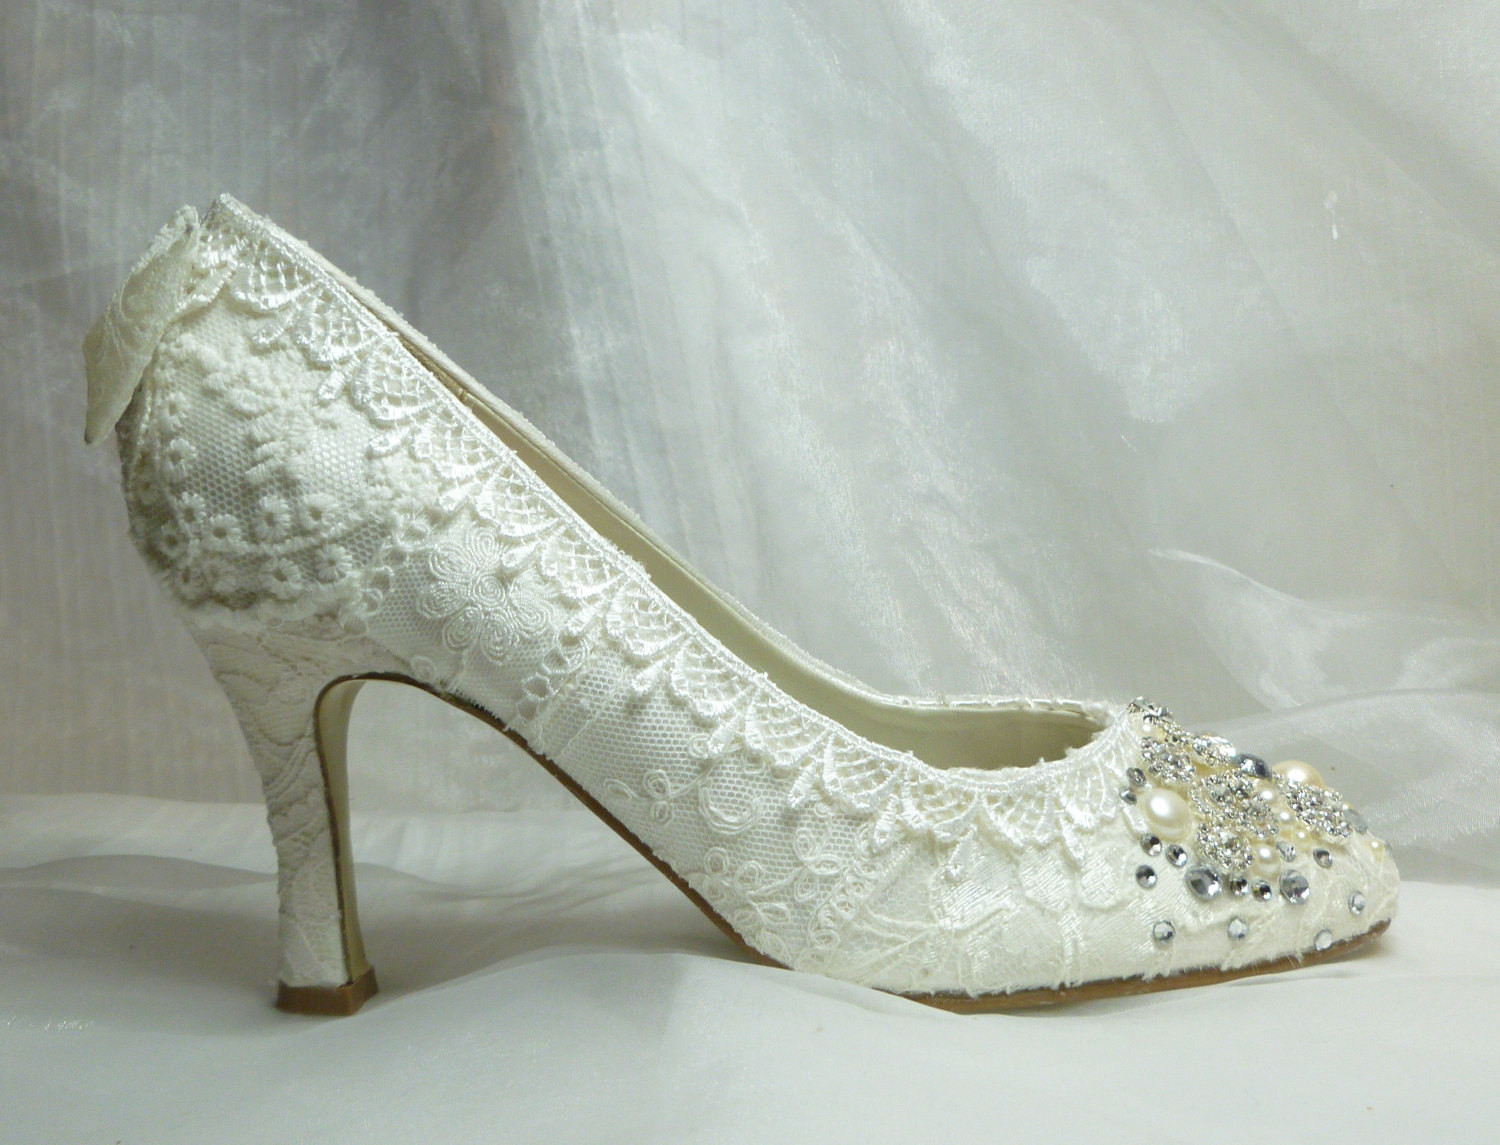 Vintage Lace Wedding Shoes
 Unavailable Listing on Etsy